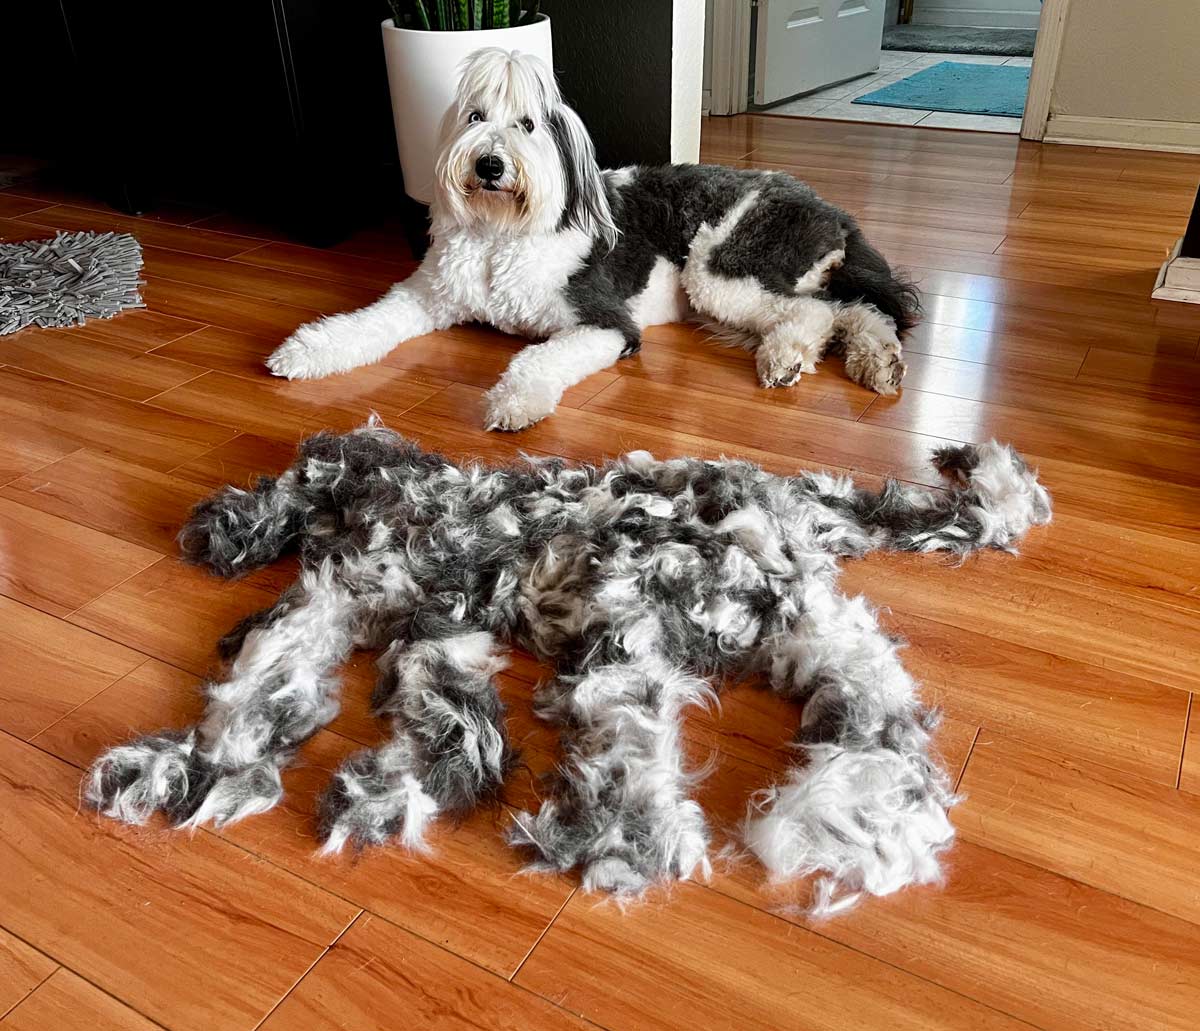 Brushed the dog and there’s enough fur for another dog